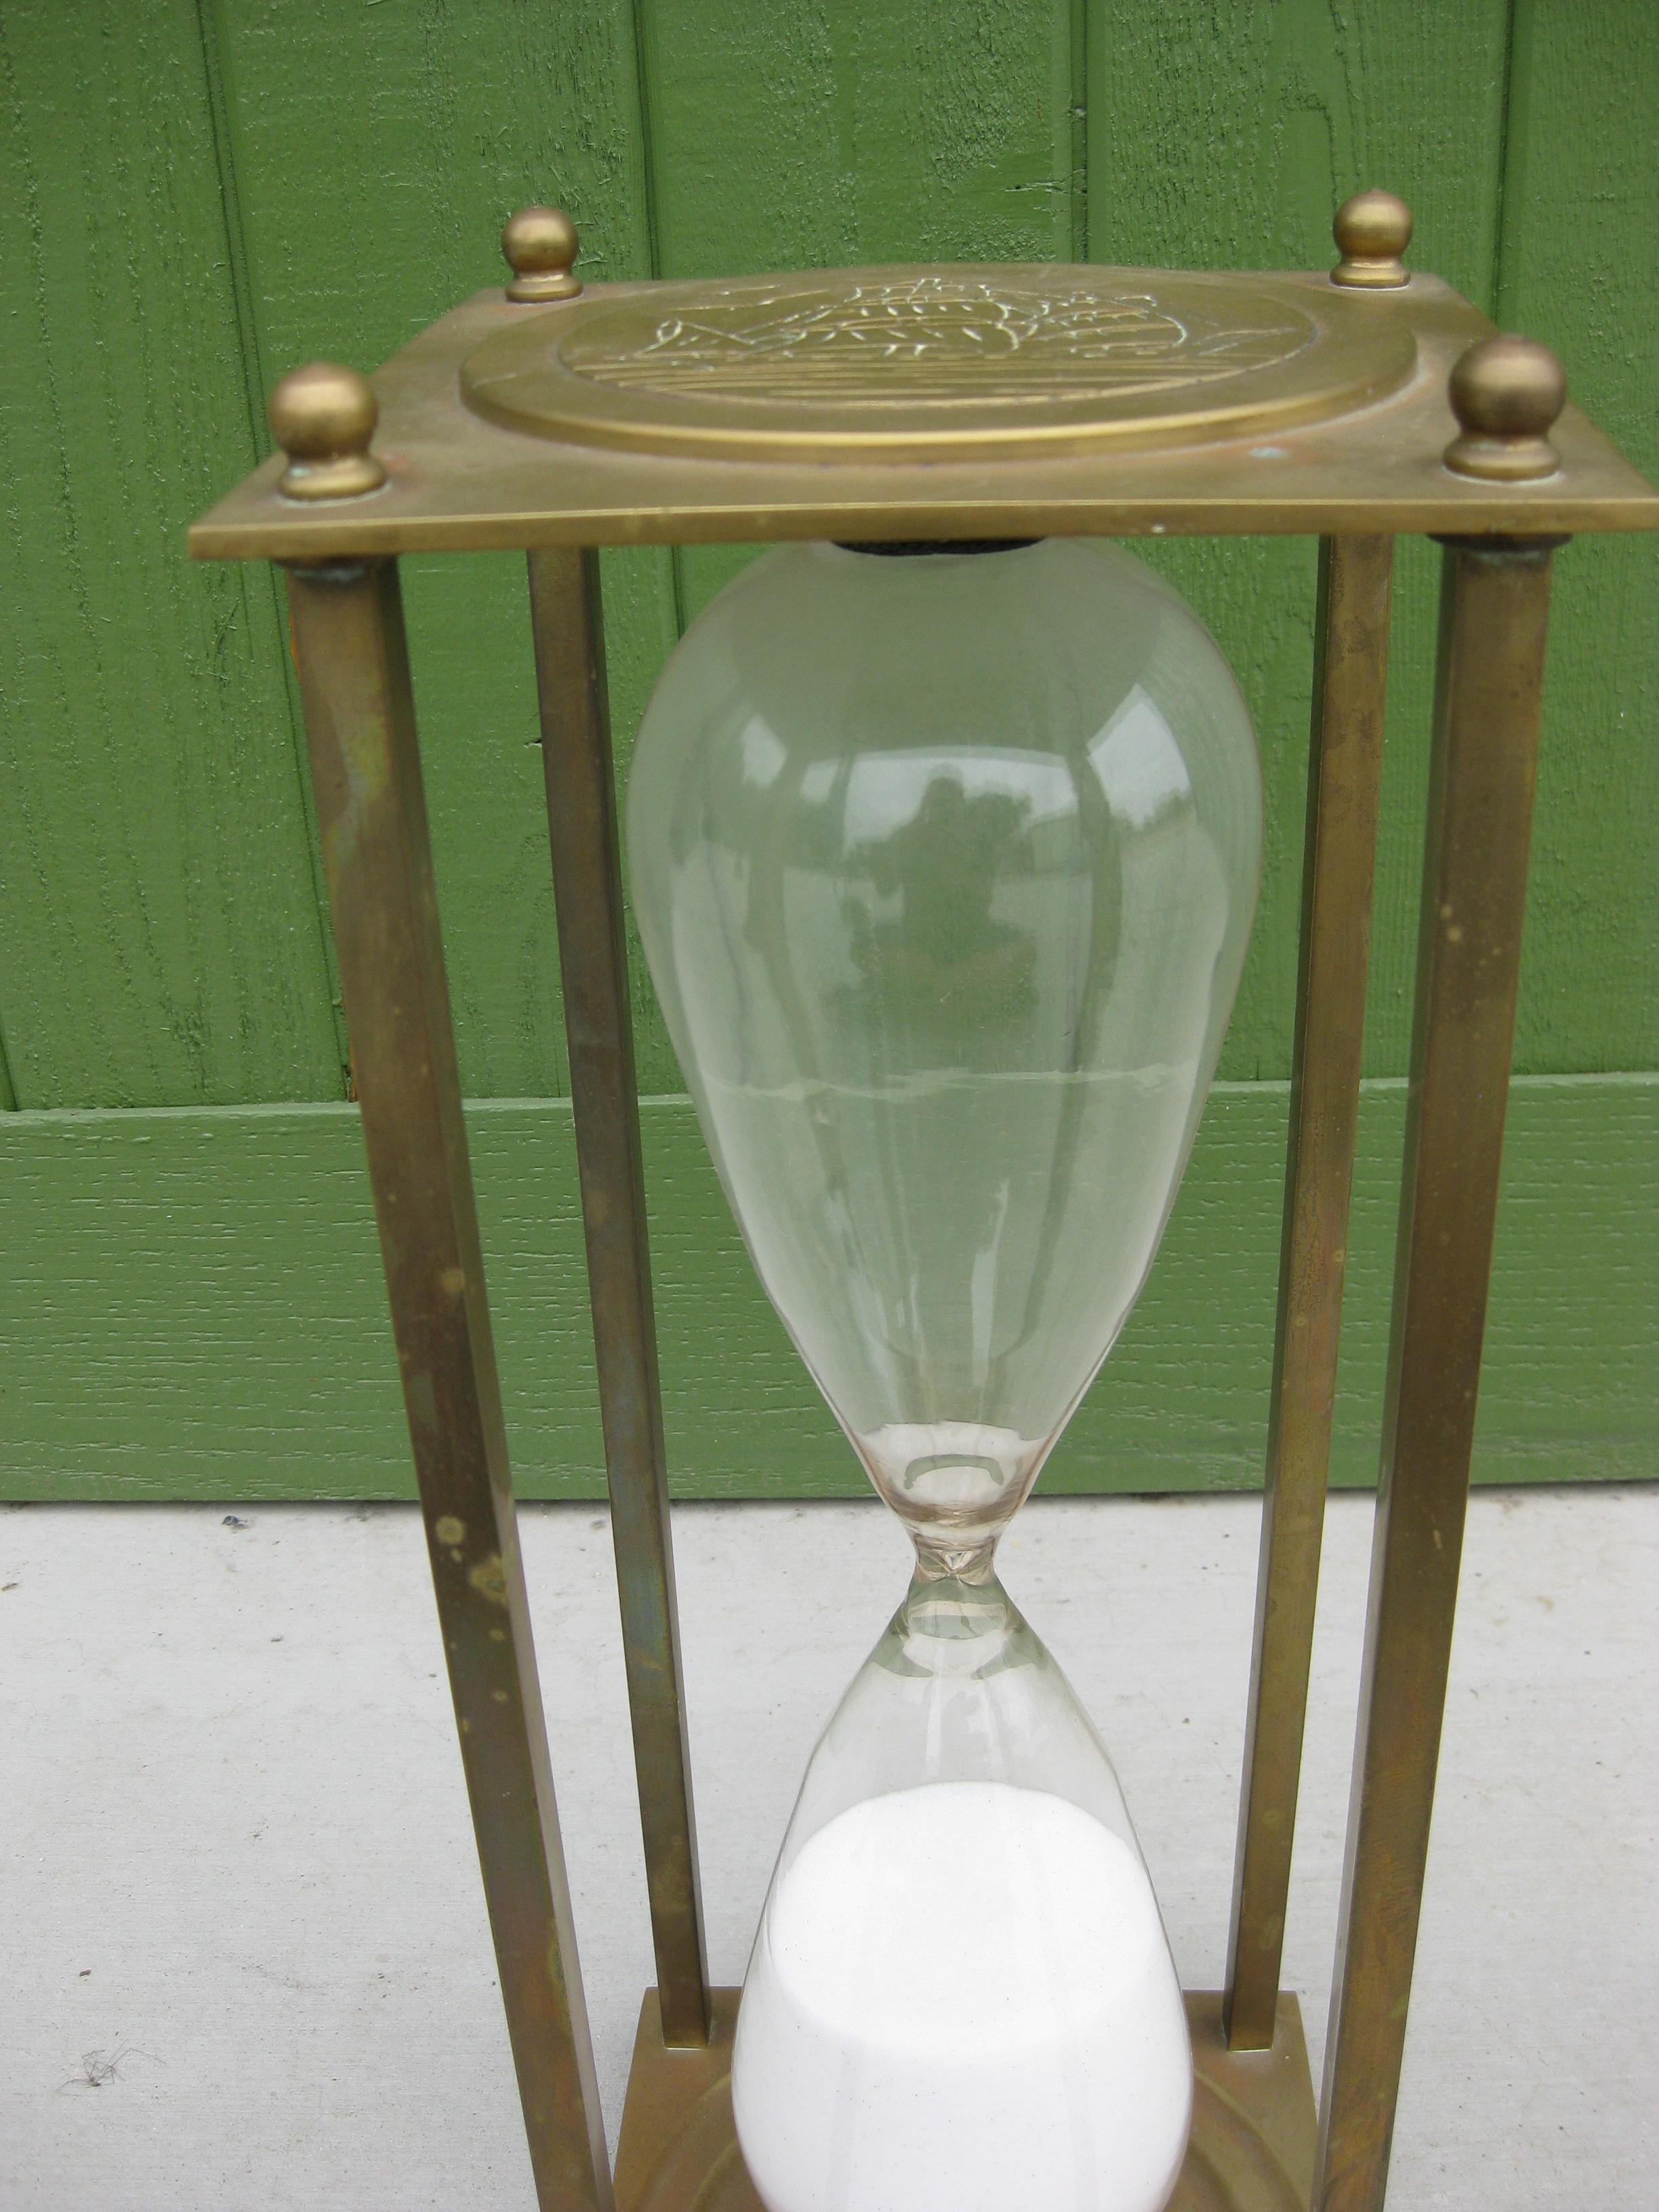 Very unique large maritime/nautical brass and glass hourglass. Wonderful dorm and design. Brass has a wonderful patina and can be polished if desired. Has a ship design engraved on both ends. The sand timer runs about 4 hours. In very nice original